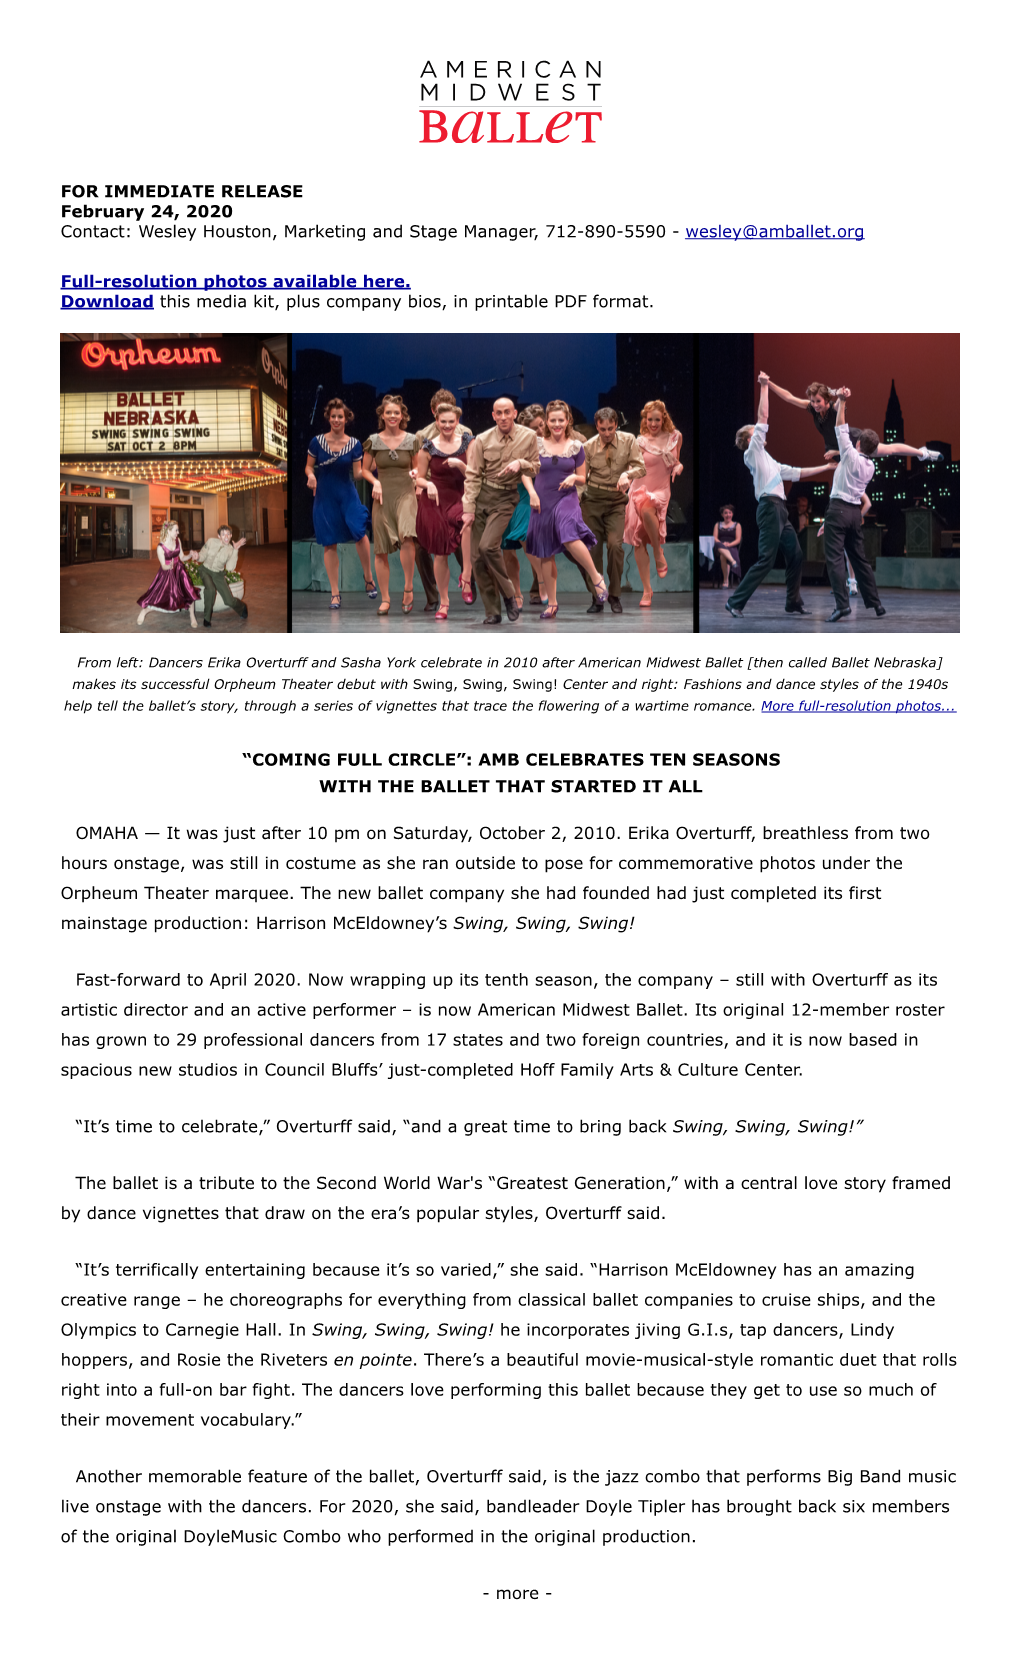 FOR IMMEDIATE RELEASE February 24, 2020 Contact: Wesley Houston, Marketing and Stage Manager, 712-890-5590 - Wesley@Amballet.Org